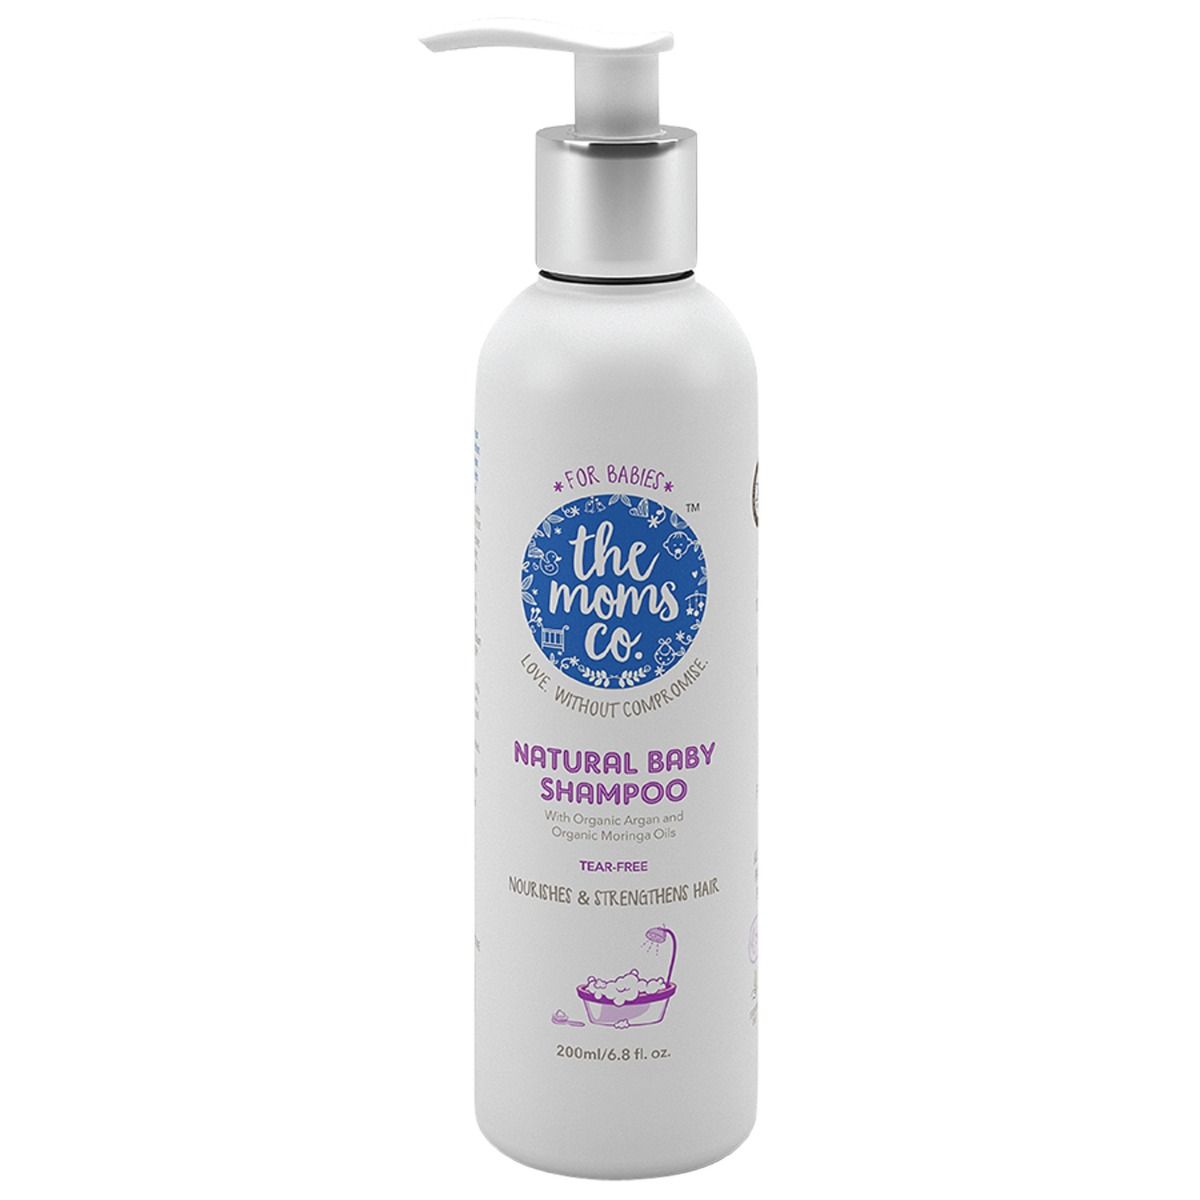 Buy The Moms Co. Natural Baby Shampoo, 200 ml Online